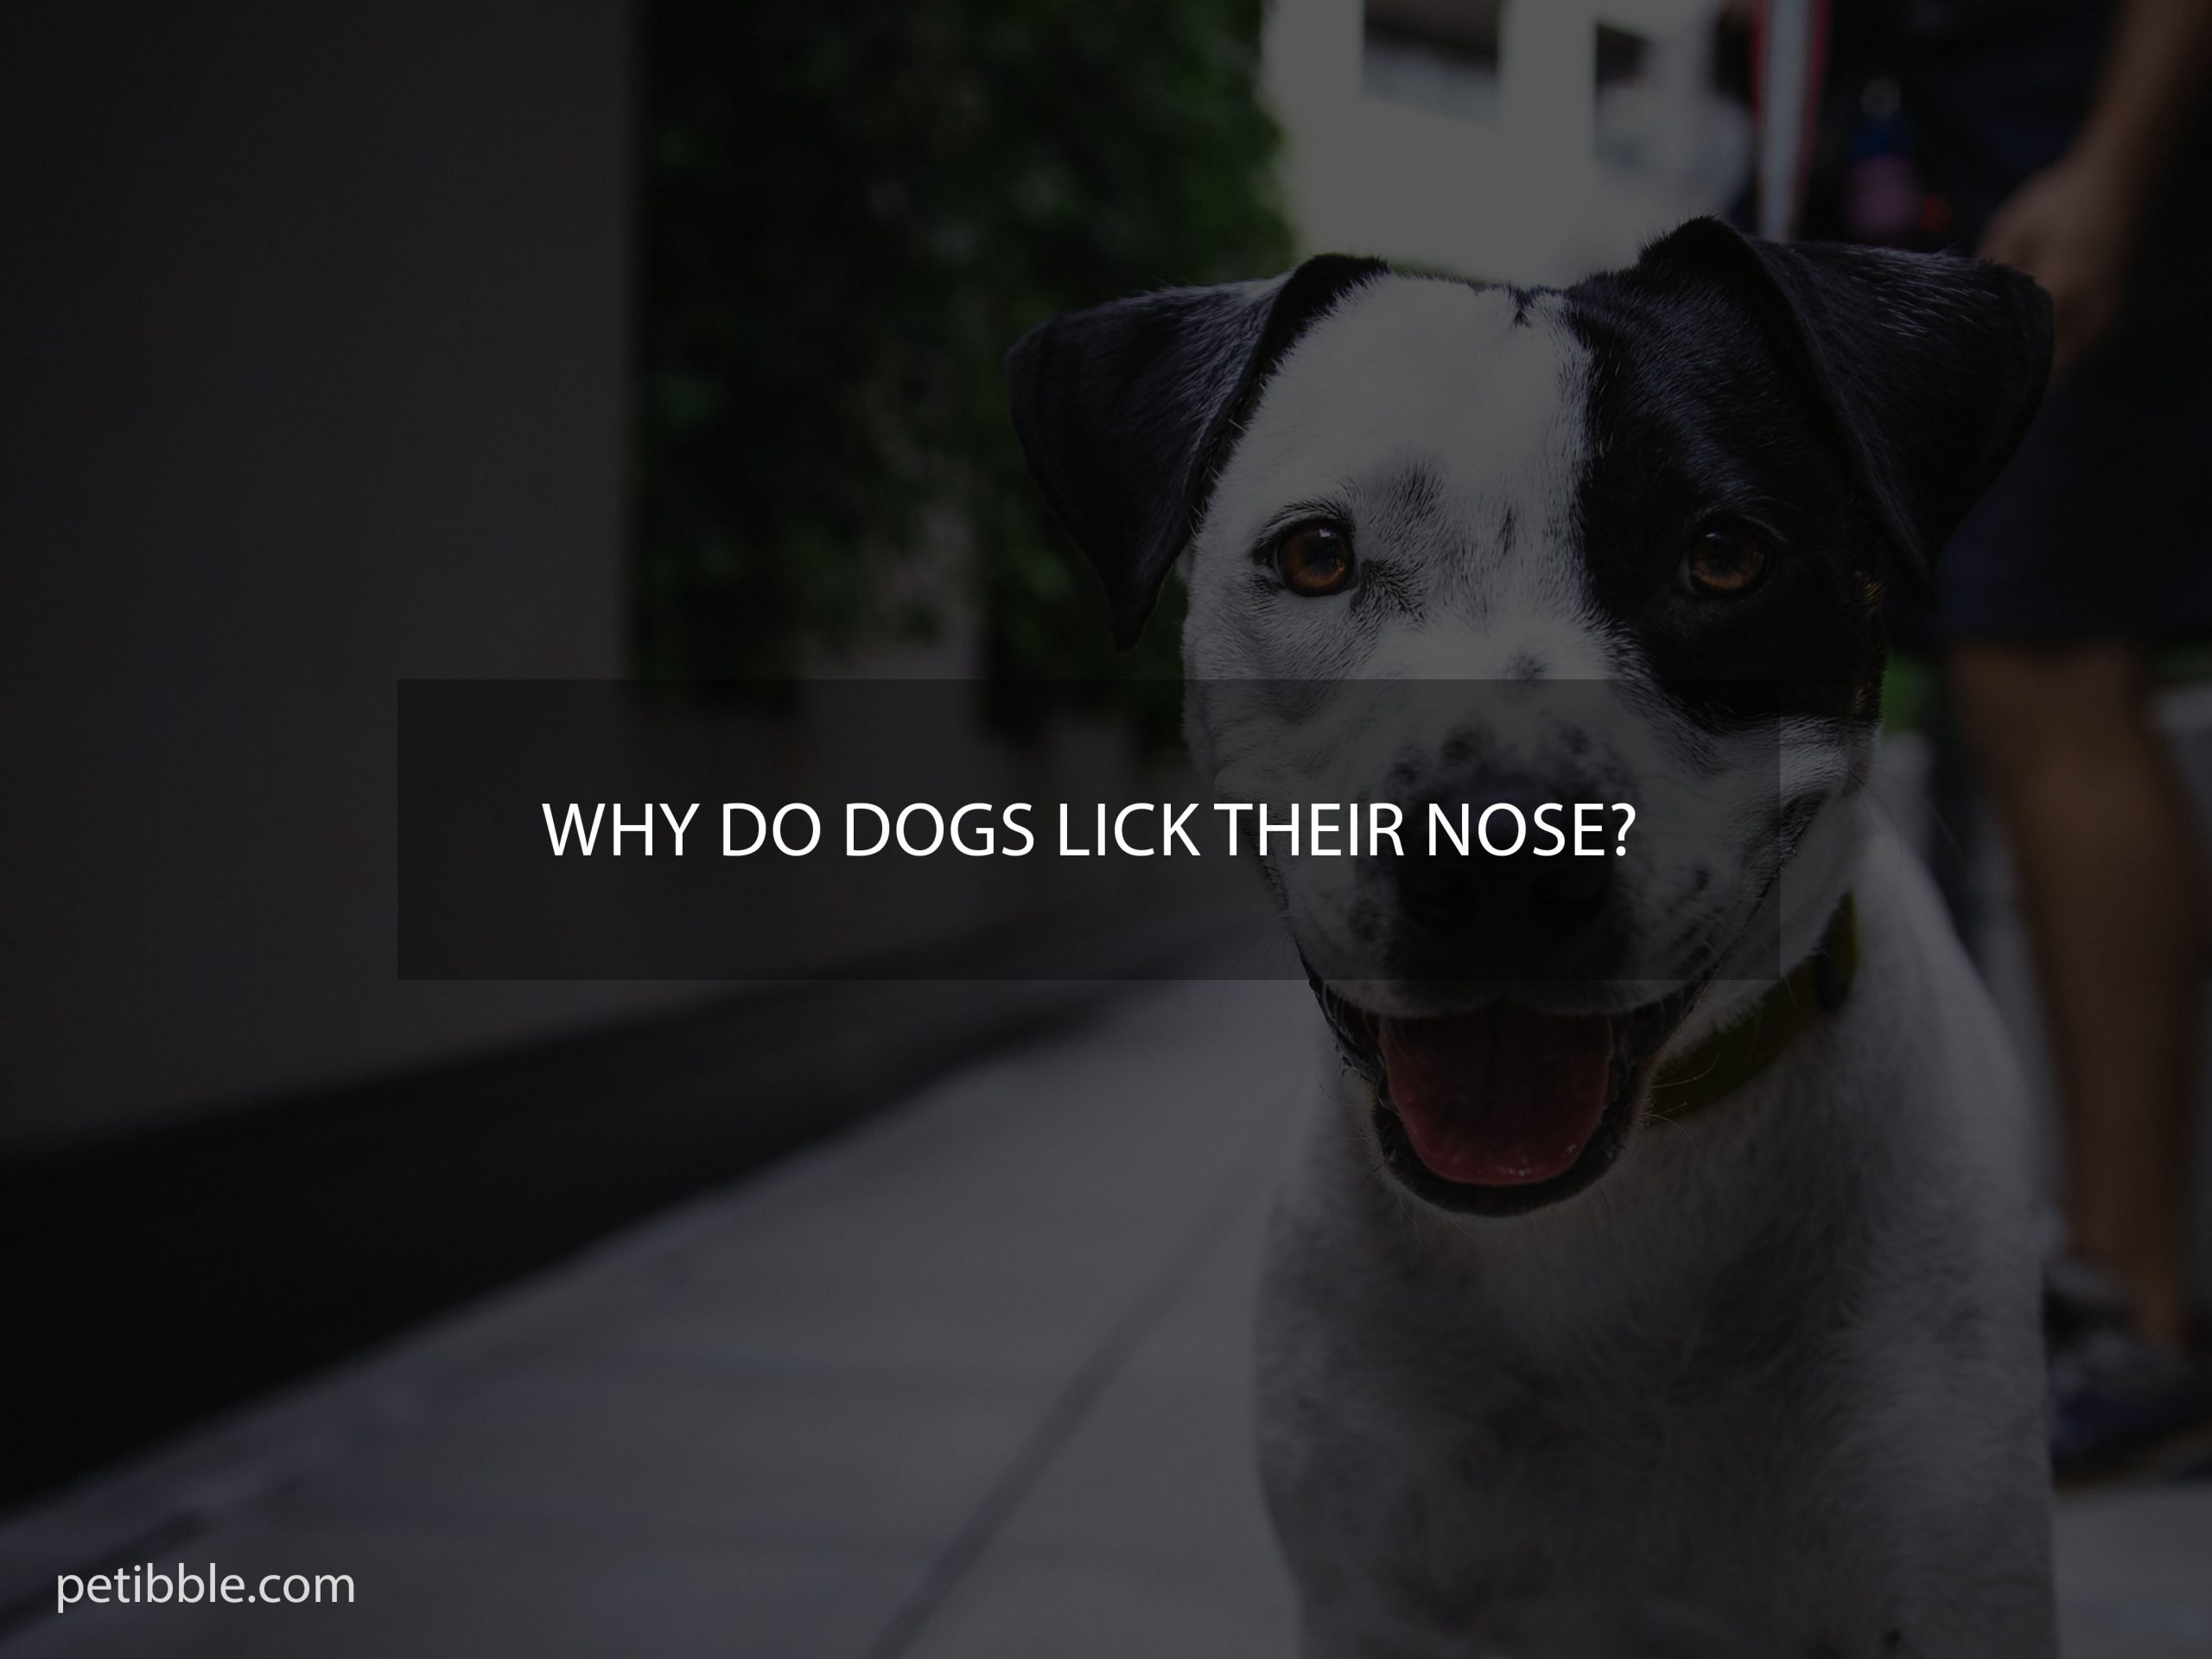 Why do dogs lick their nose?